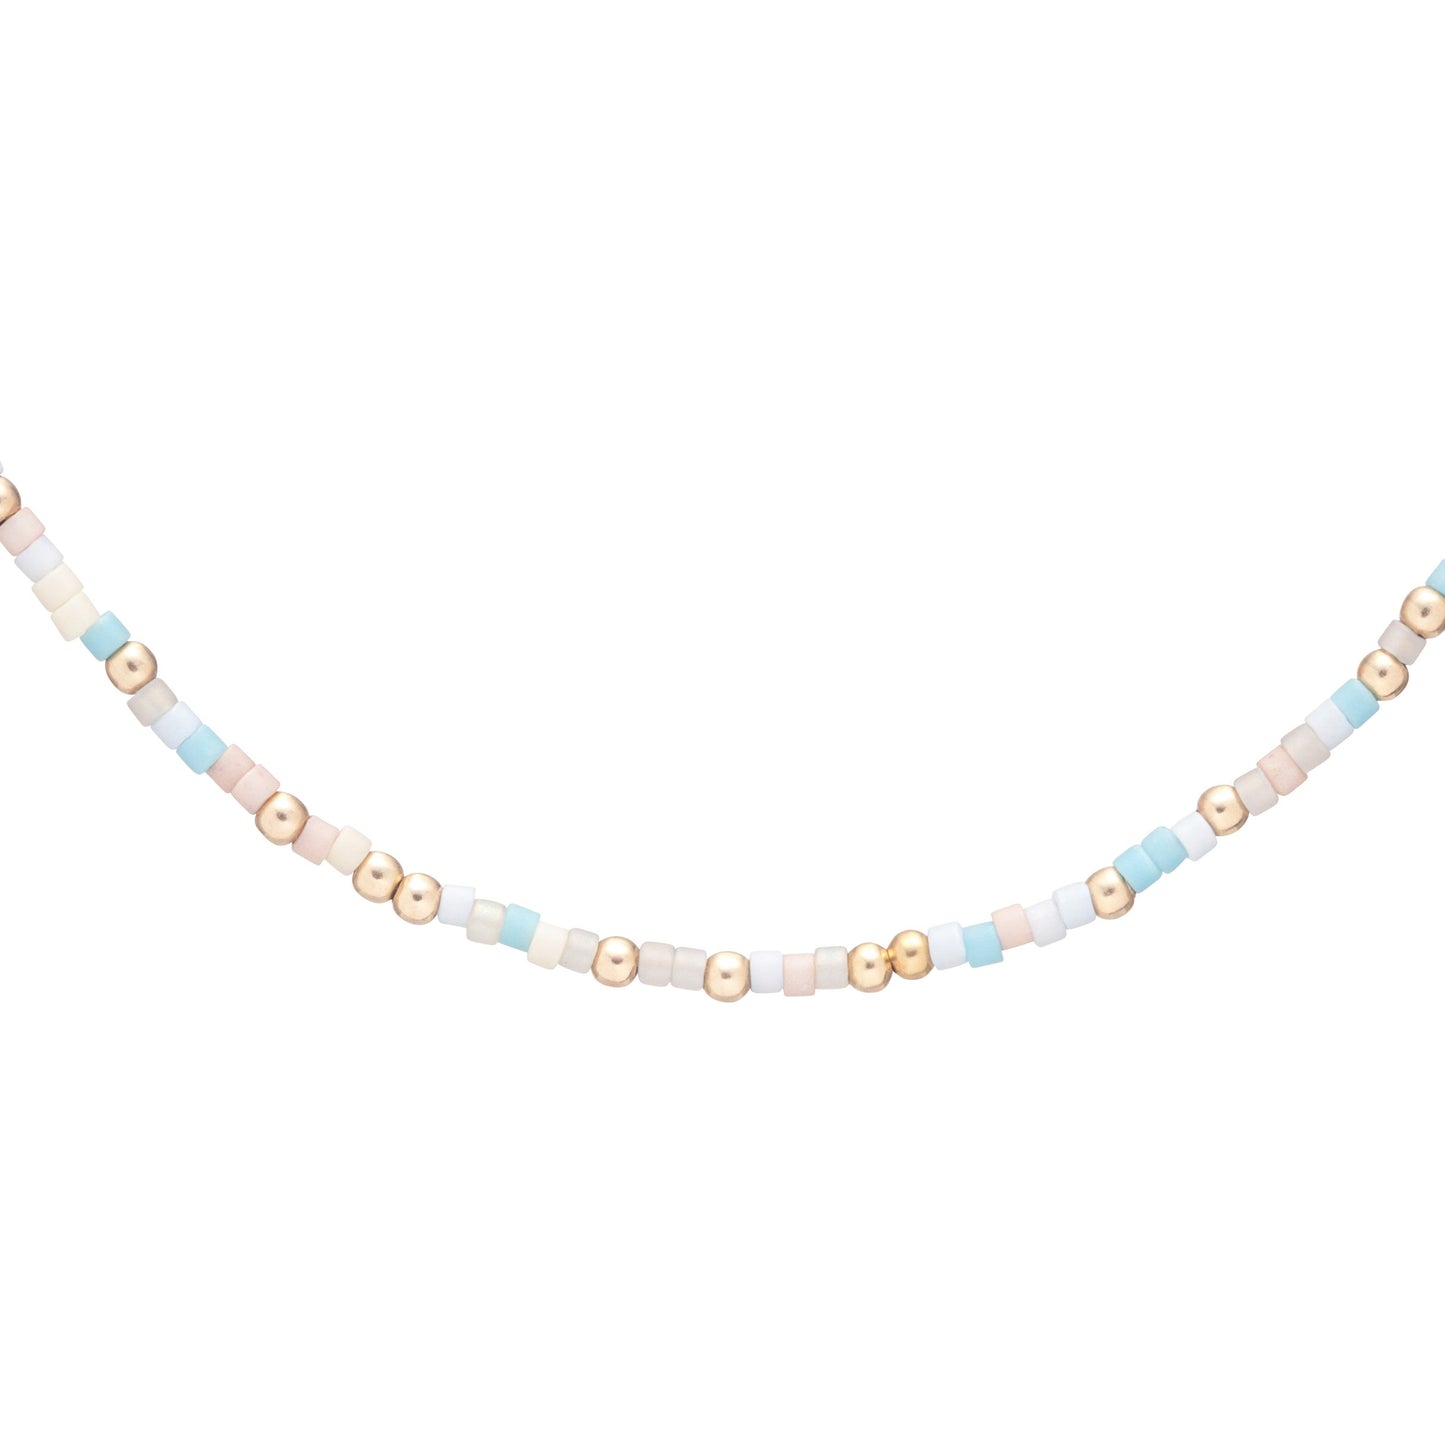 Enewton Choker 15" Hope Unwritten Necklaces in Cotton Candy at Wrapsody